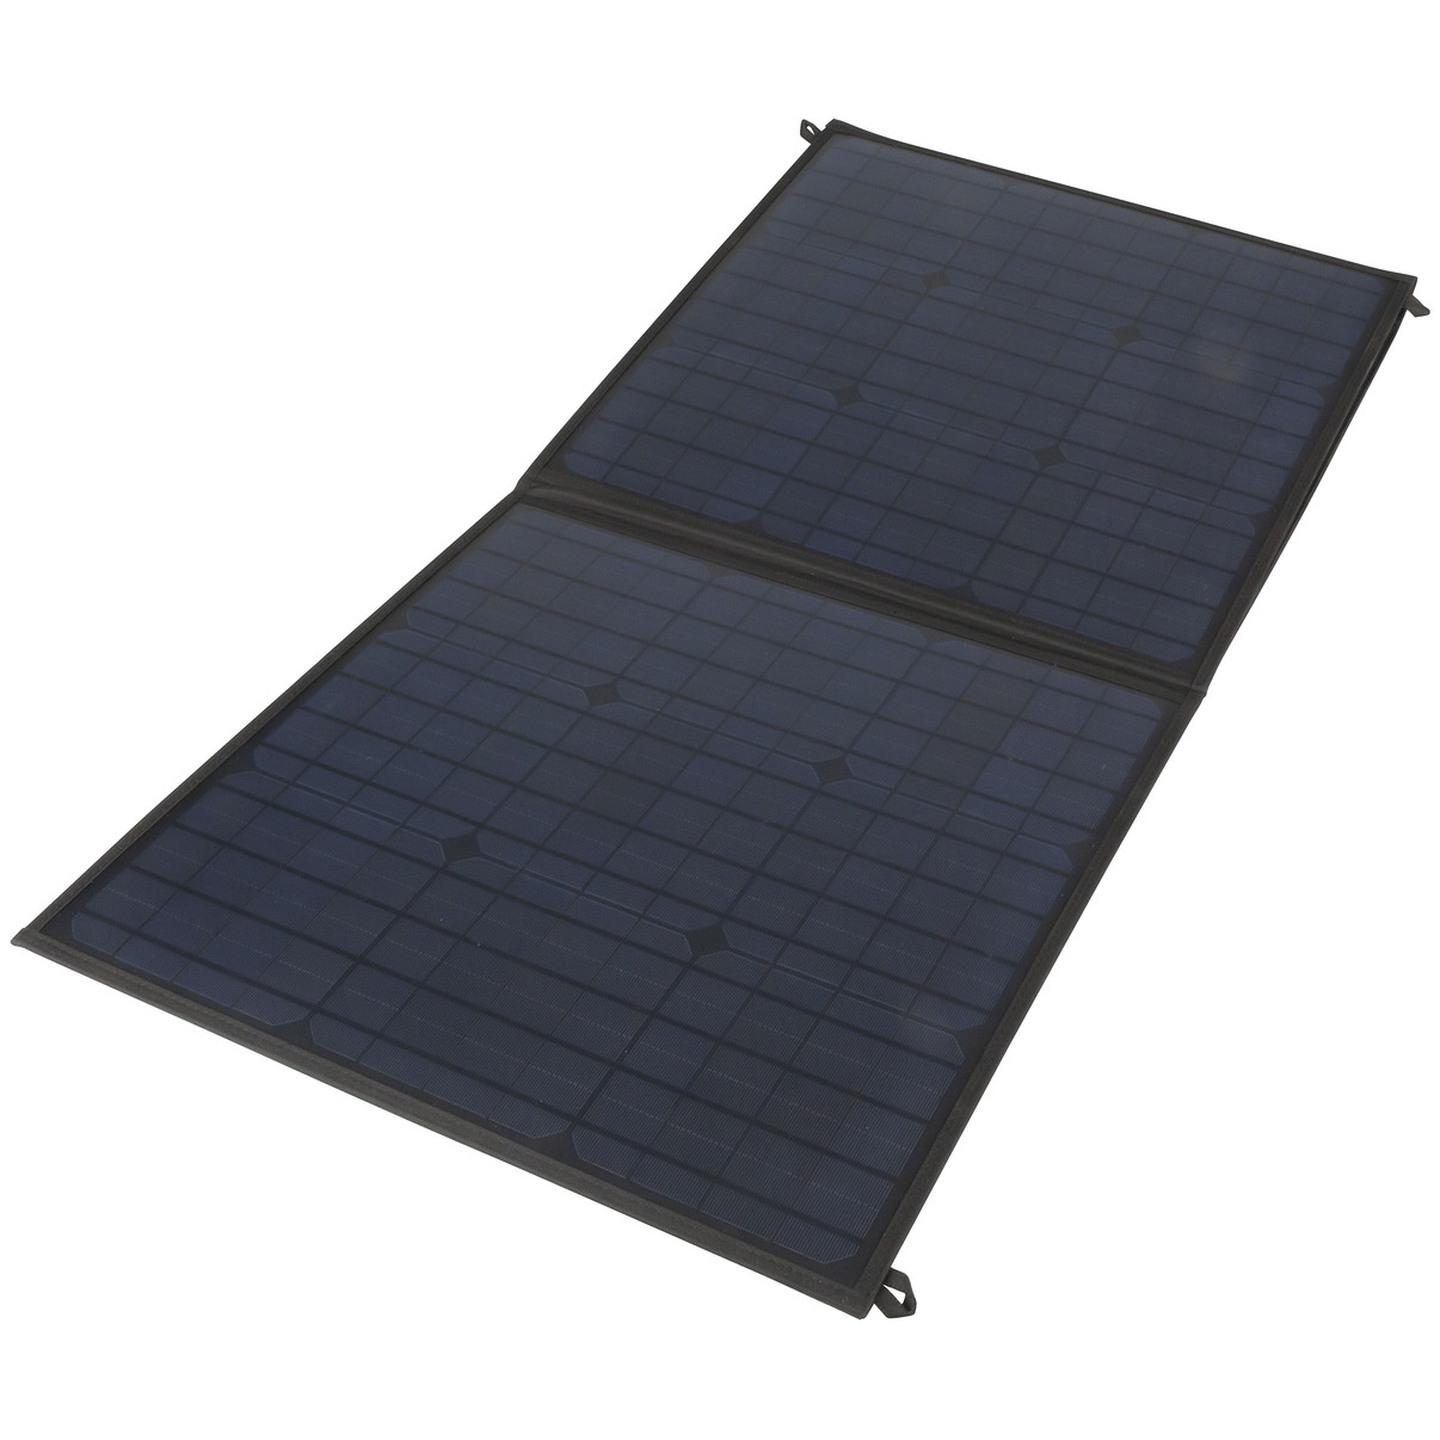 100W Canvas Blanket Solar Panel suitable for Rovin Fridge/Freezer with Solar and Battery Support